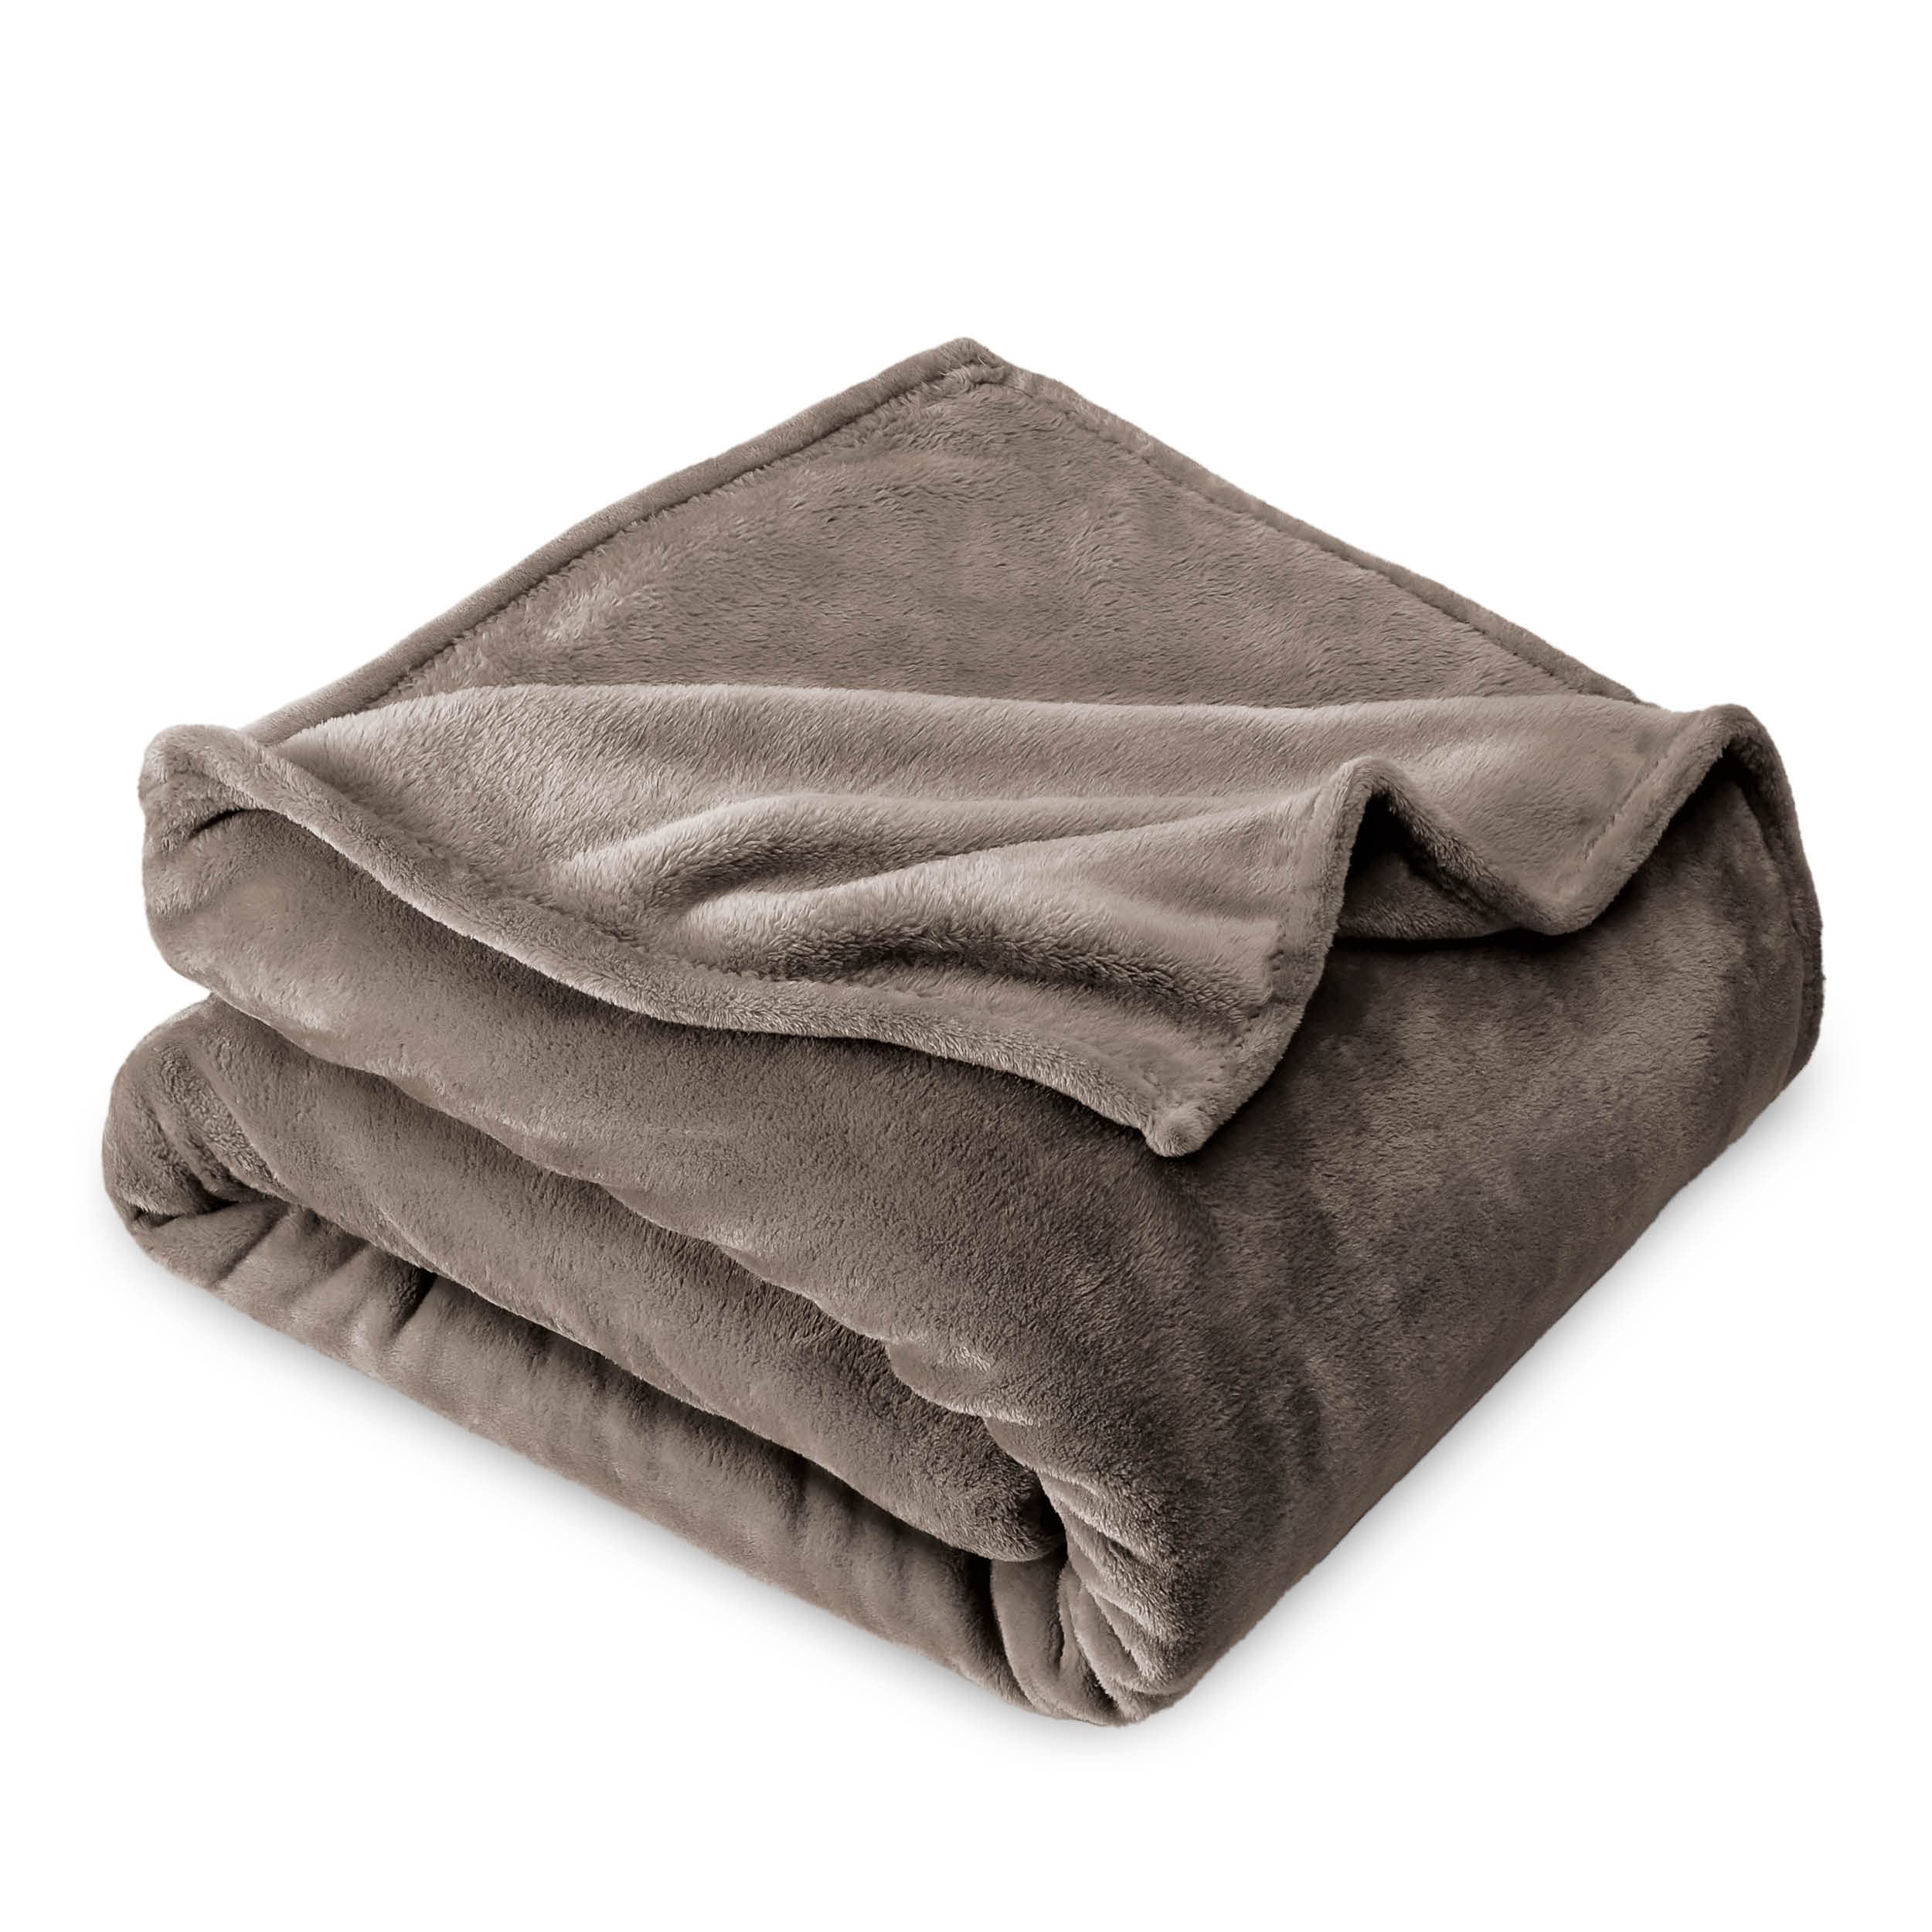 Book Cover Bare Home Fleece Blanket - Twin/Twin Extra Long Blanket - Taupe - Lightweight Blanket for Bed, Sofa, Couch, Camping, and Travel - Microplush - Ultra Soft Warm Blanket (Twin/Twin XL, Taupe) Twin/Twin XL 18 - Taupe